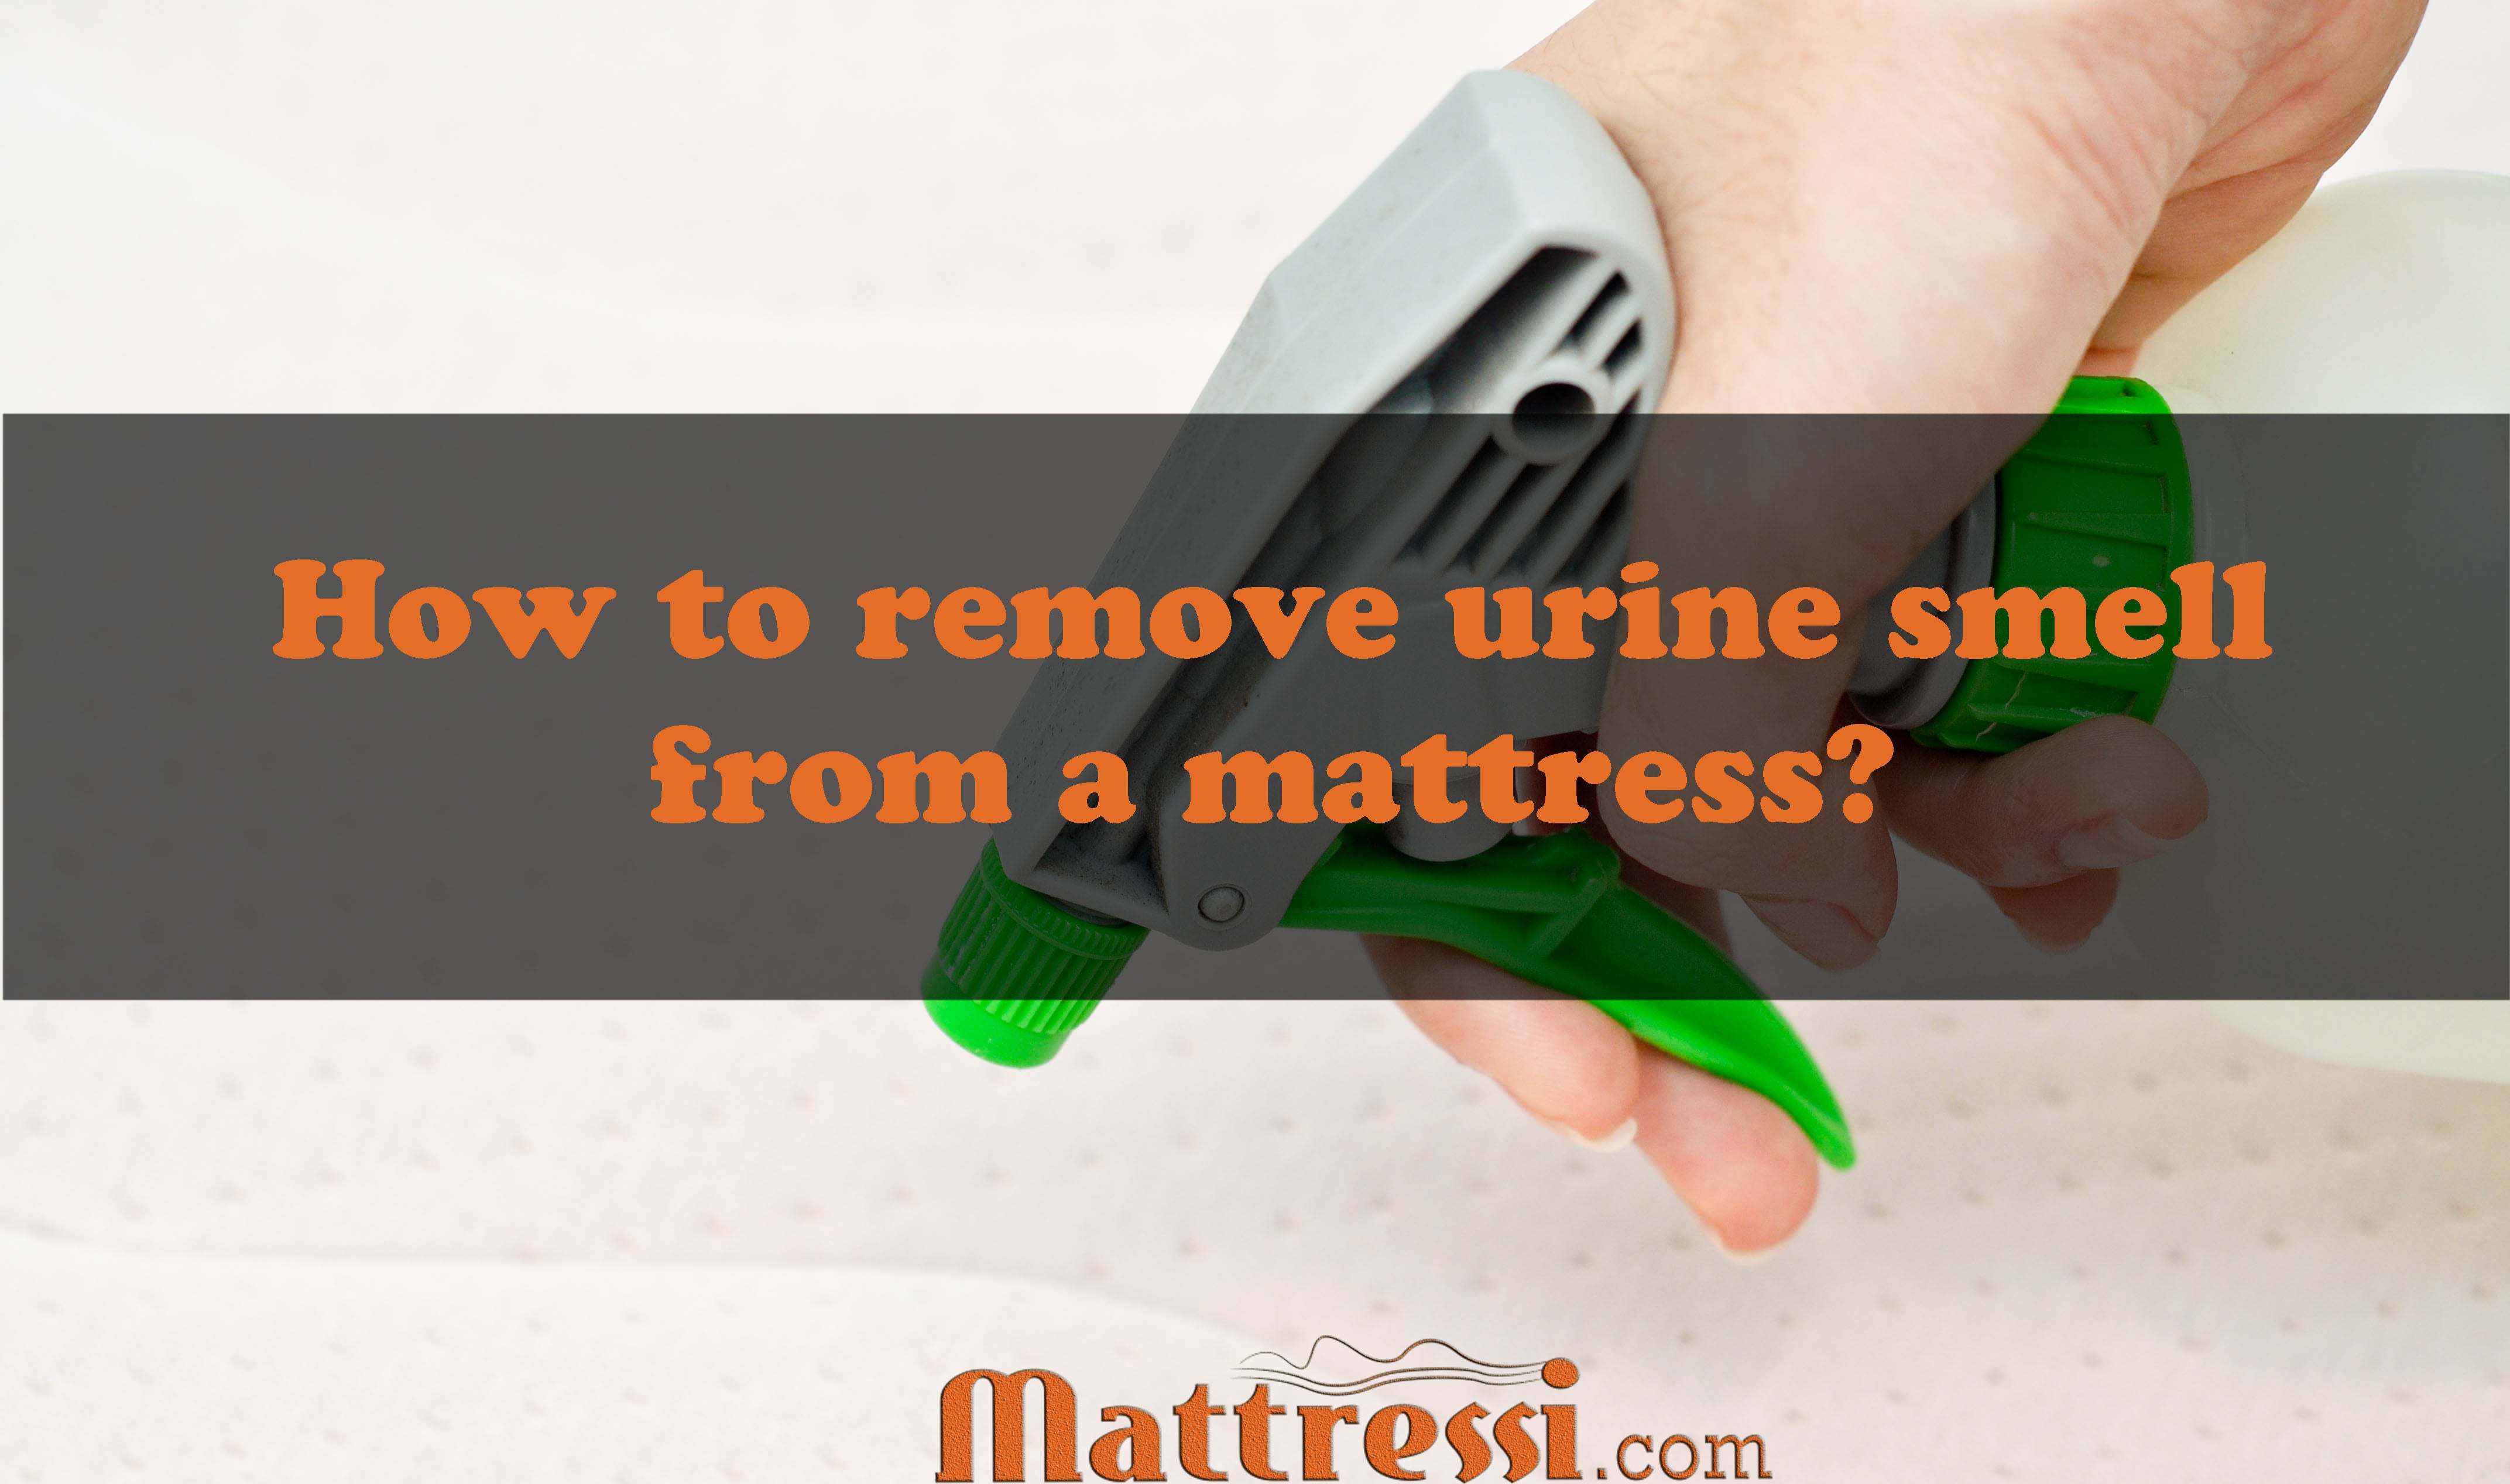 How To Remove Urine Smell From a Mattress?